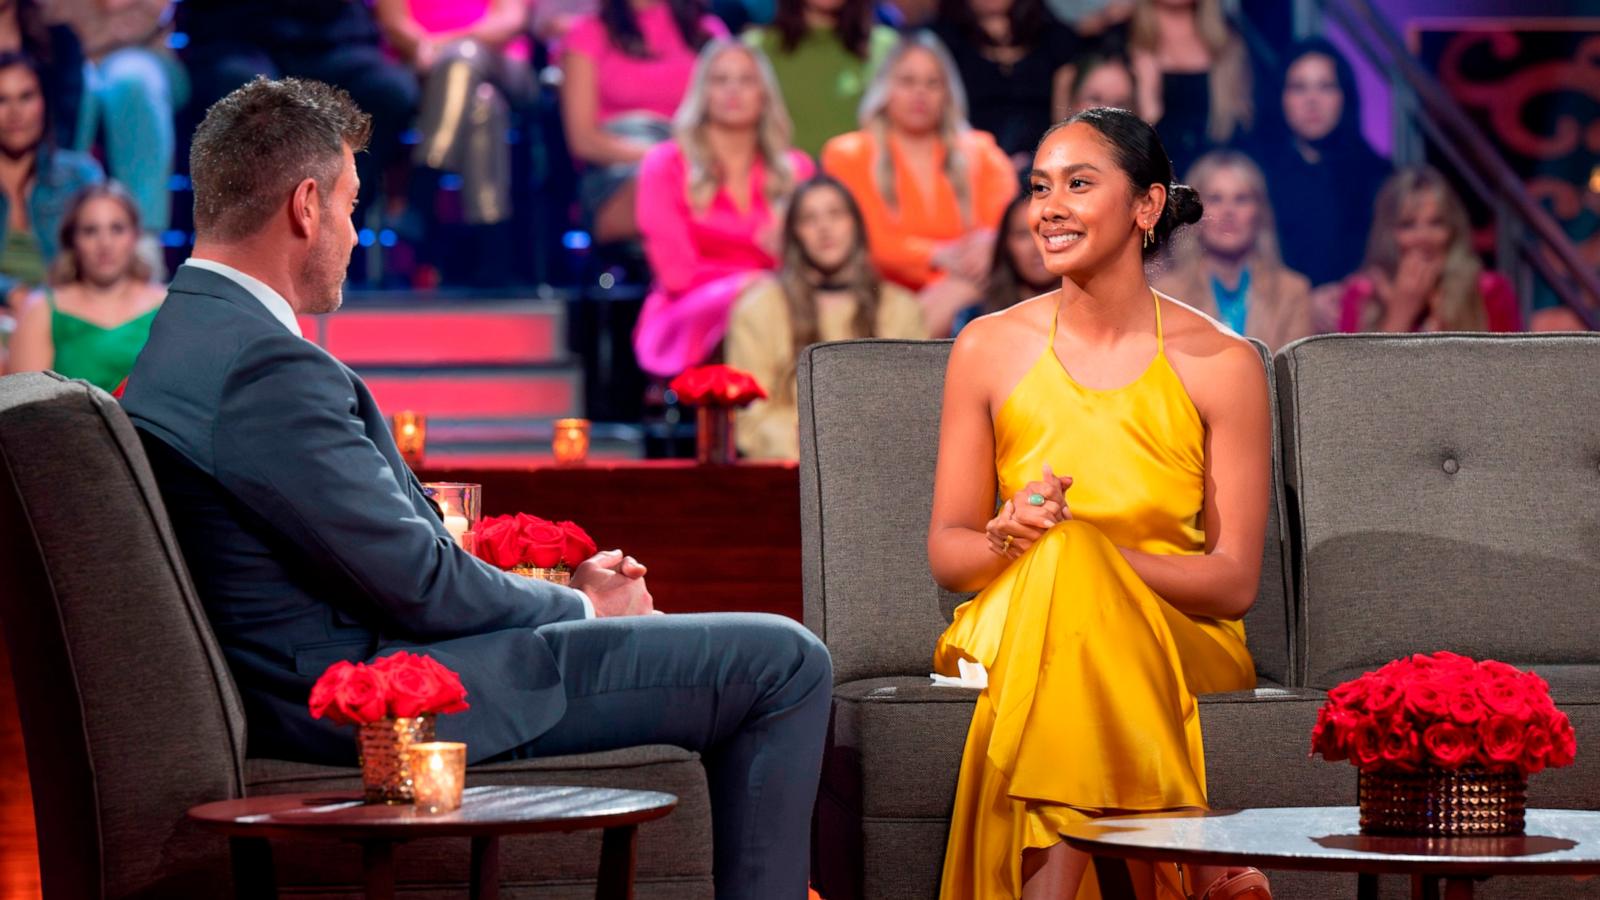 PHOTO: Jesse Palmer and Rachel Nance on "The Bachelor: The Women Tell All."